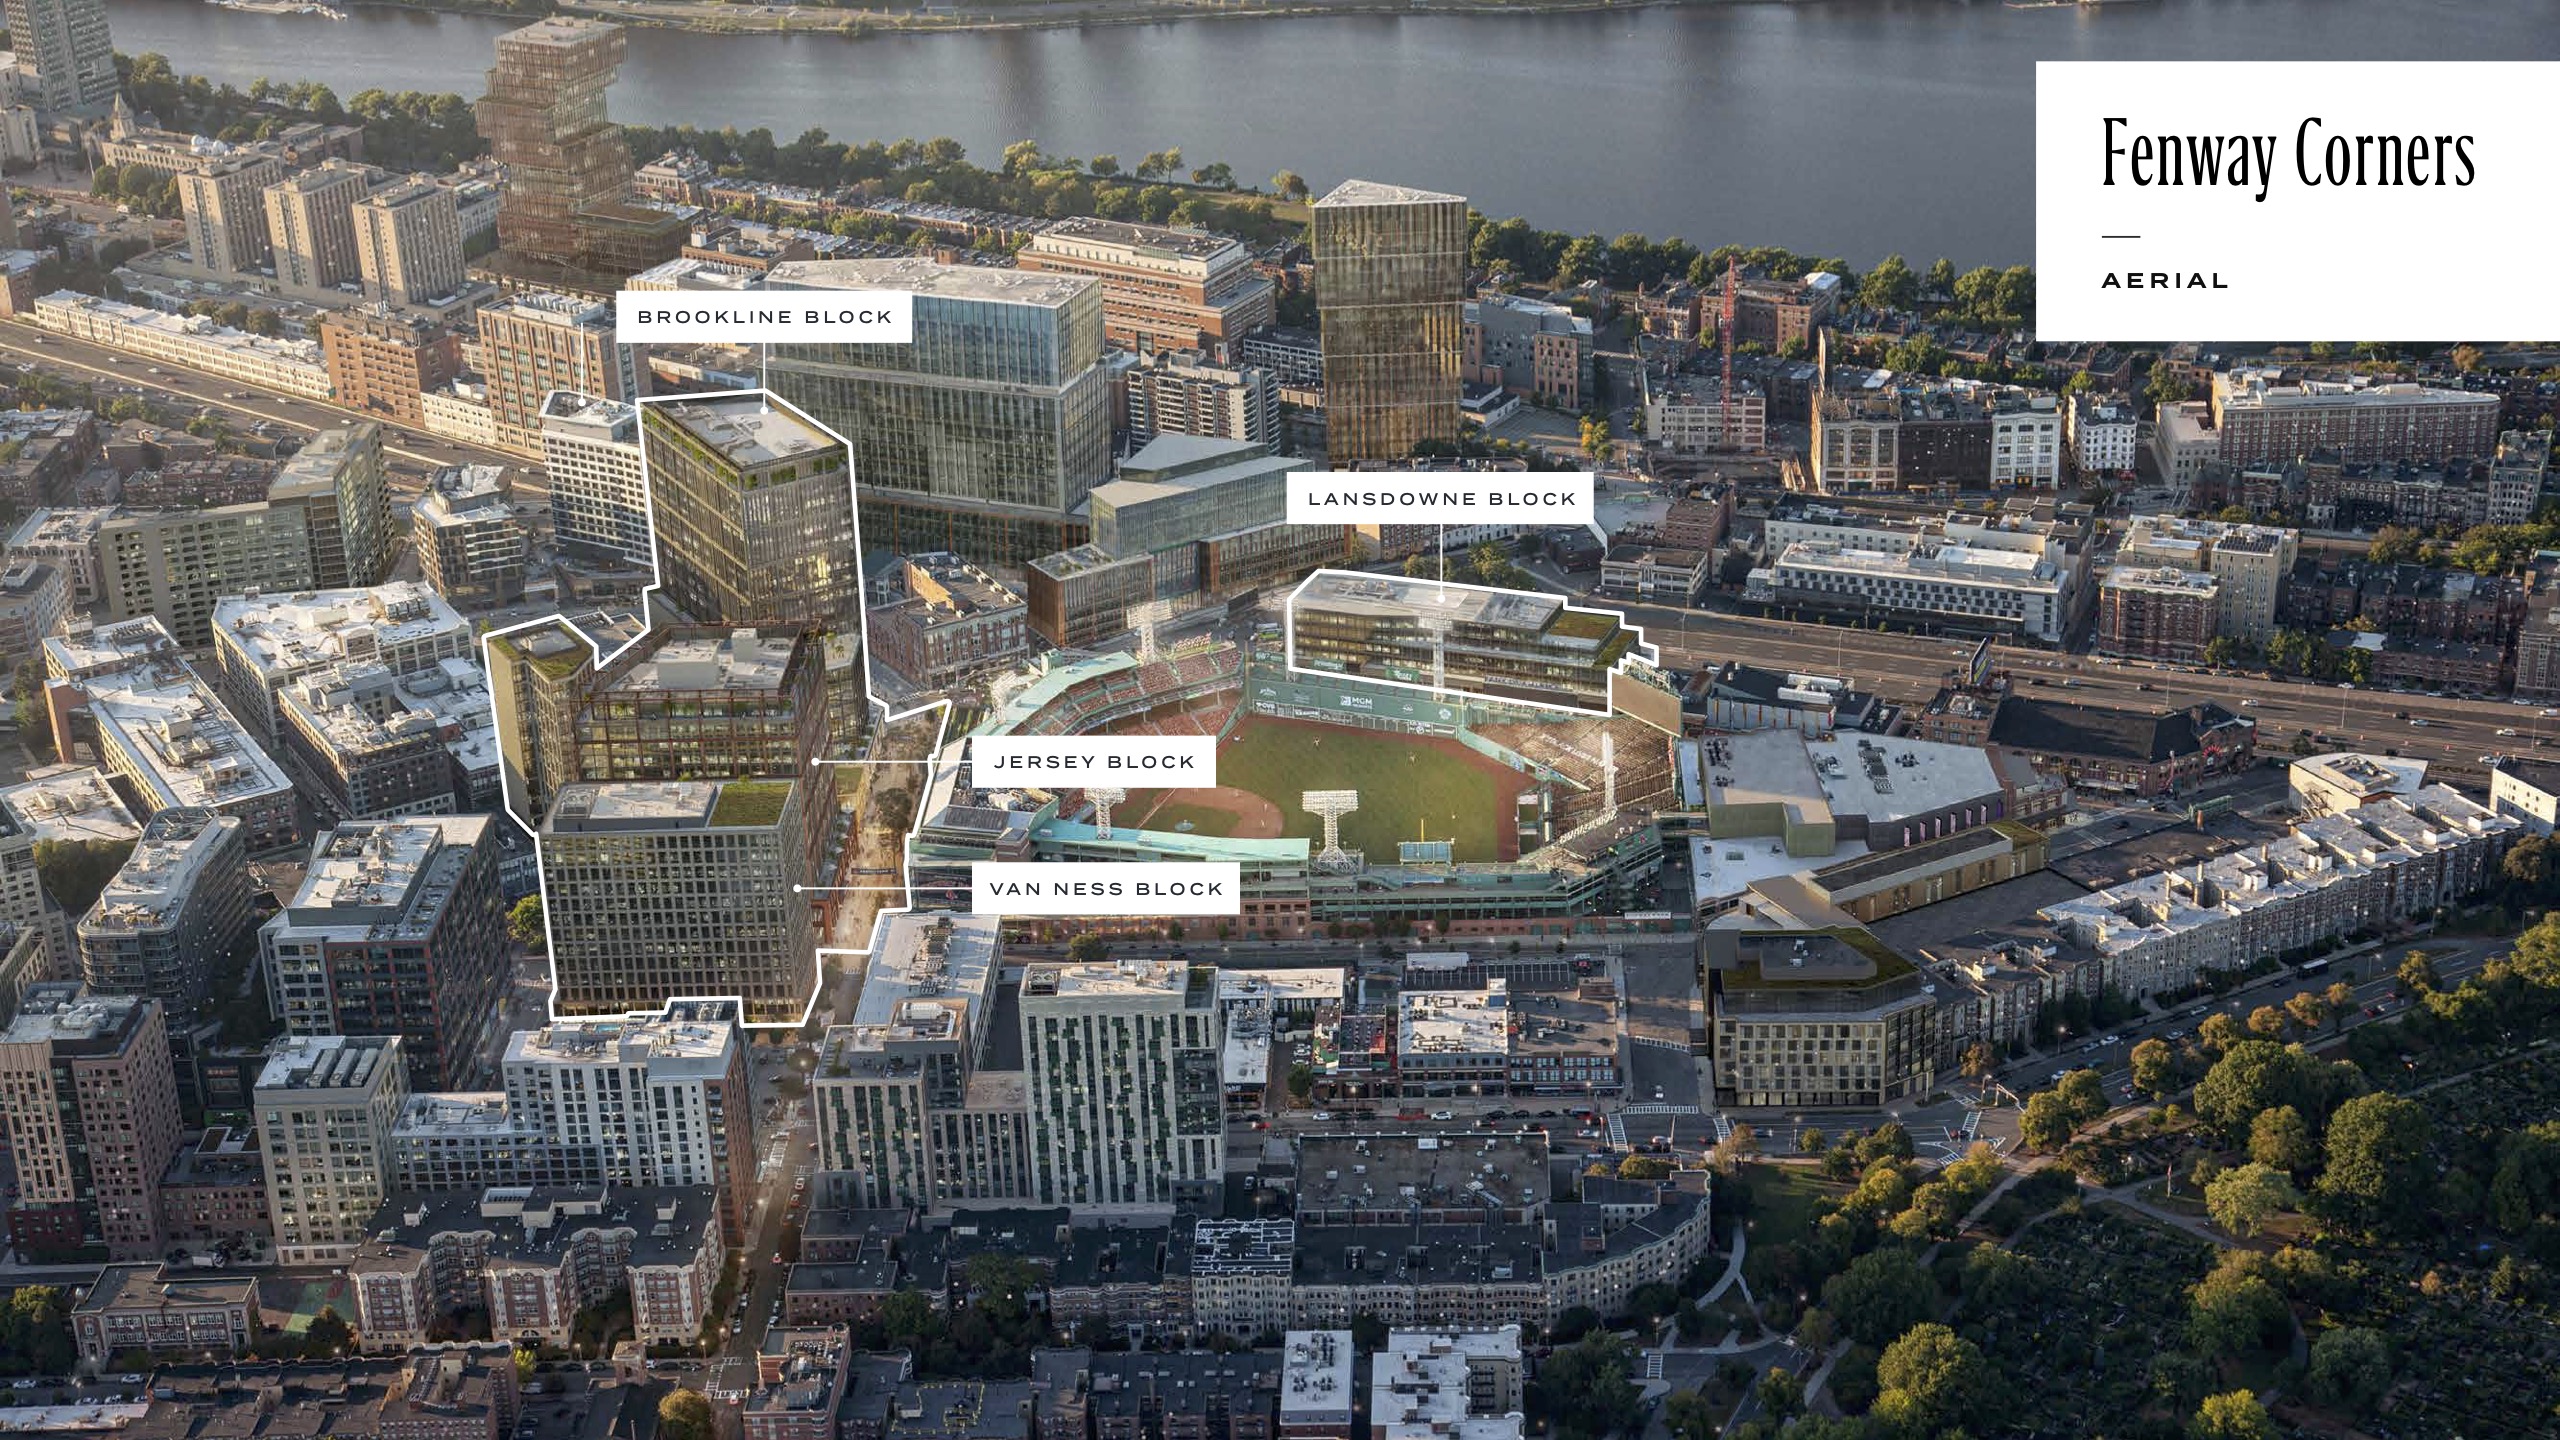 Boston officials approve $1.6B 'Fenway Corners' project close to Fenway Park  